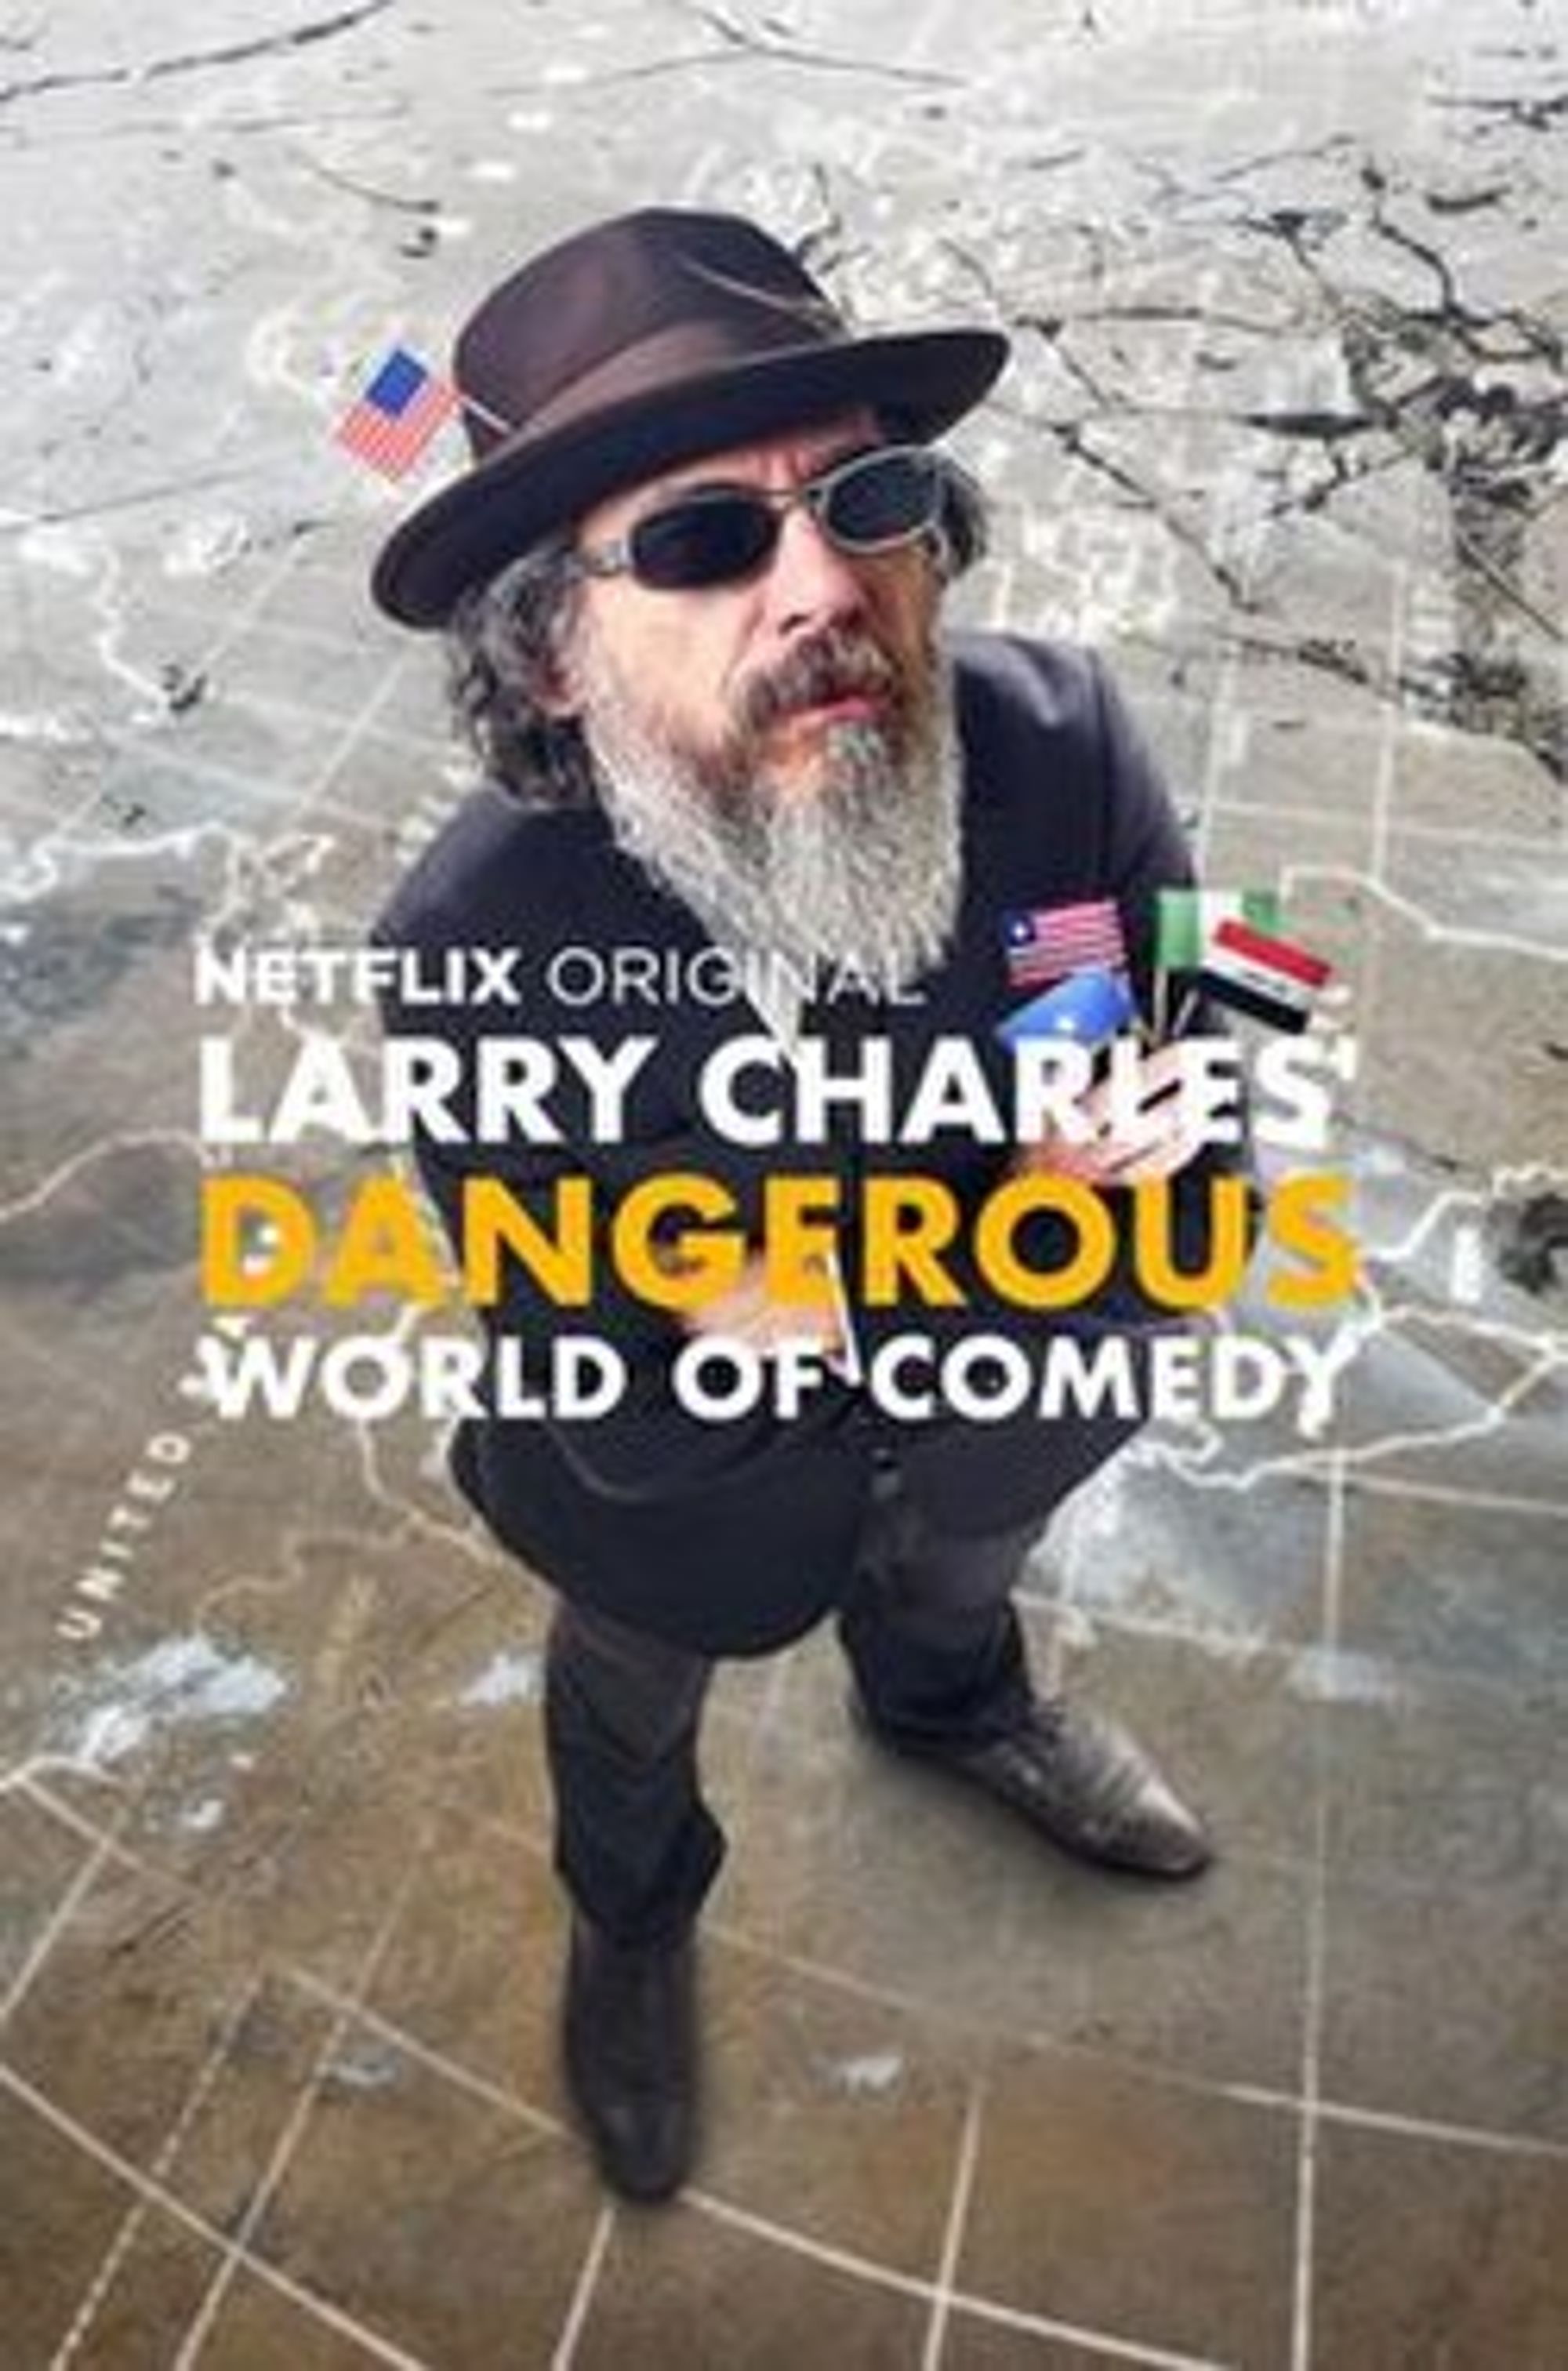 Larry Charles' Dangerous World of Comedy - Wikipedia